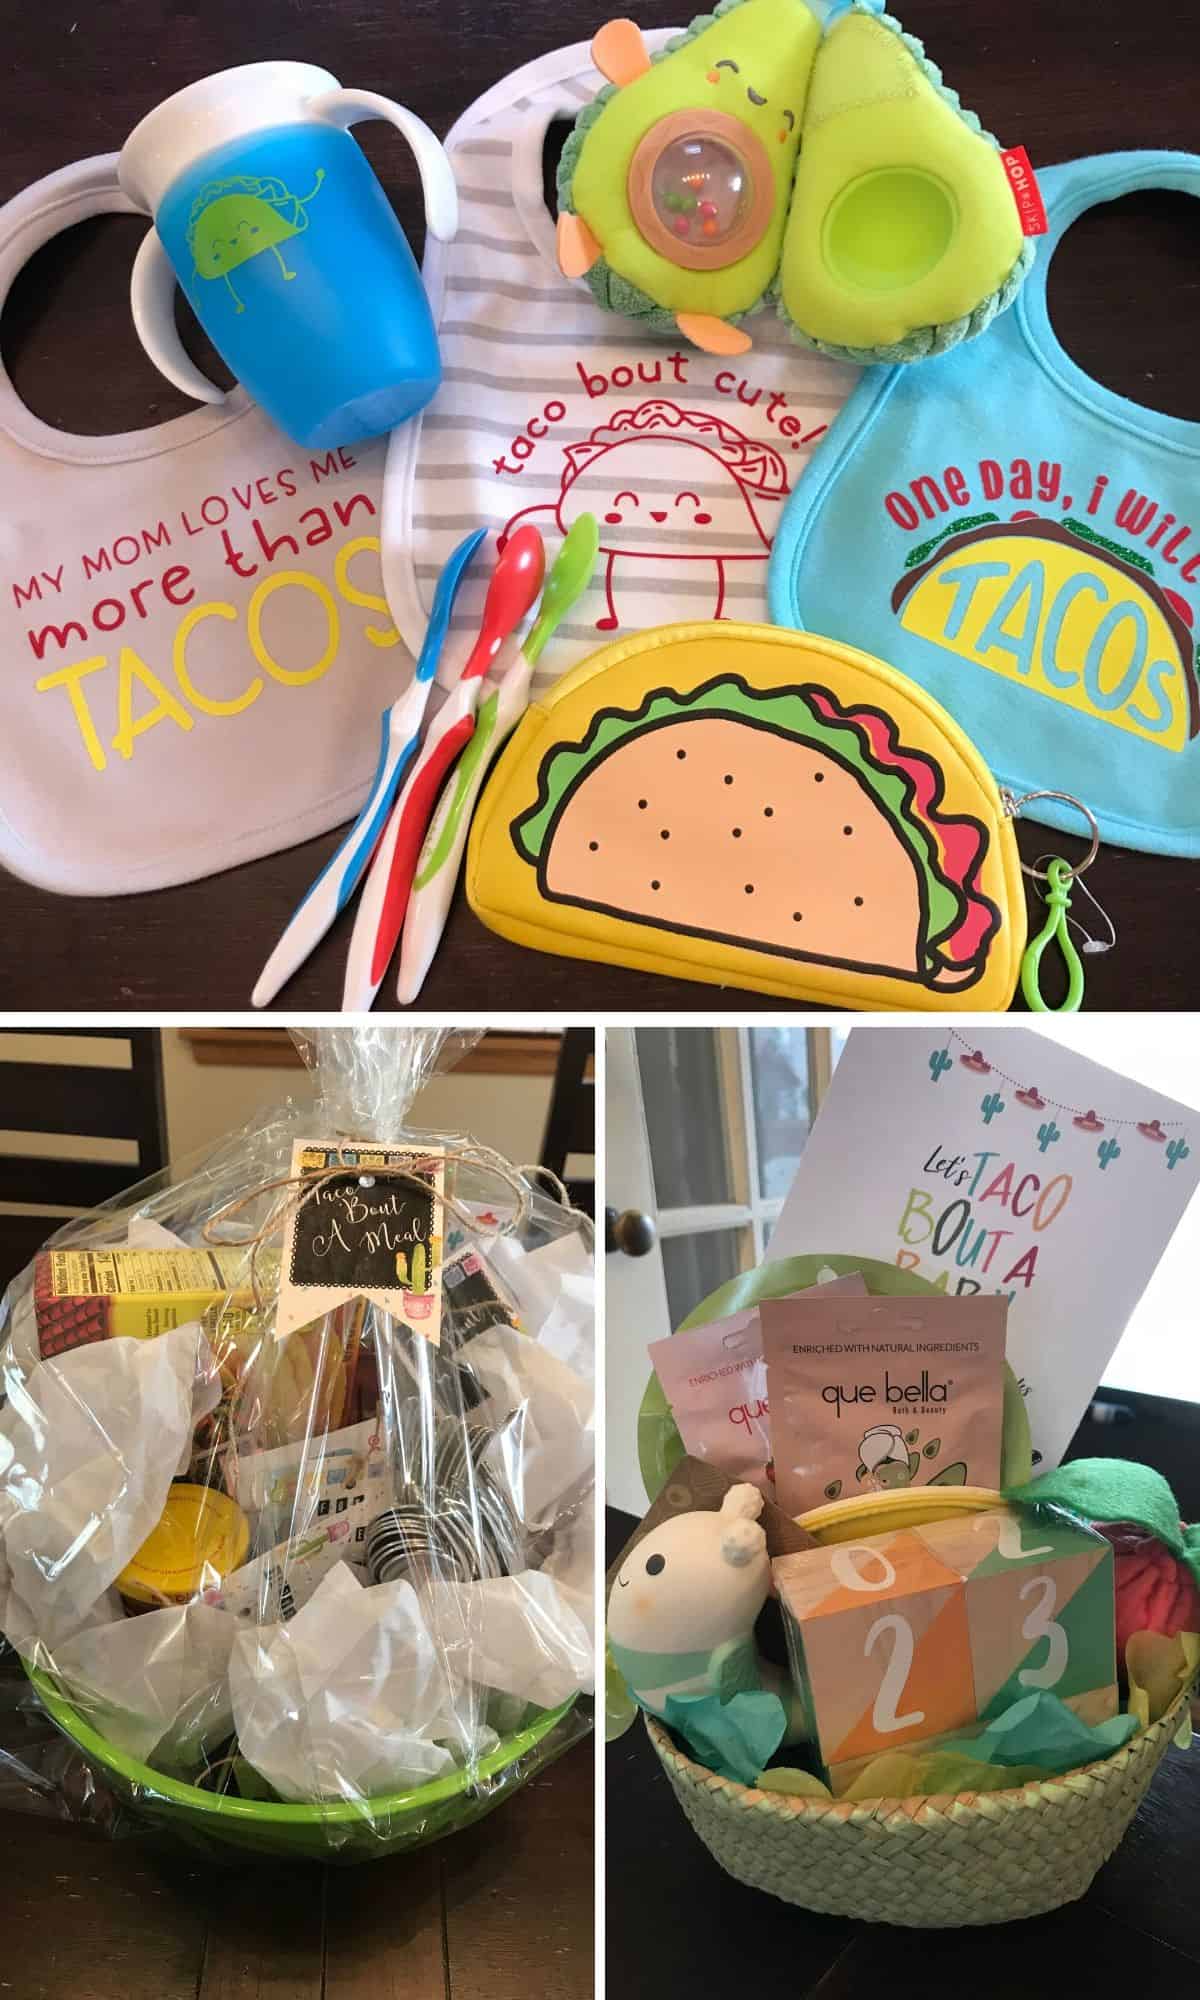 Baby Shower Gifts in Taco Theme